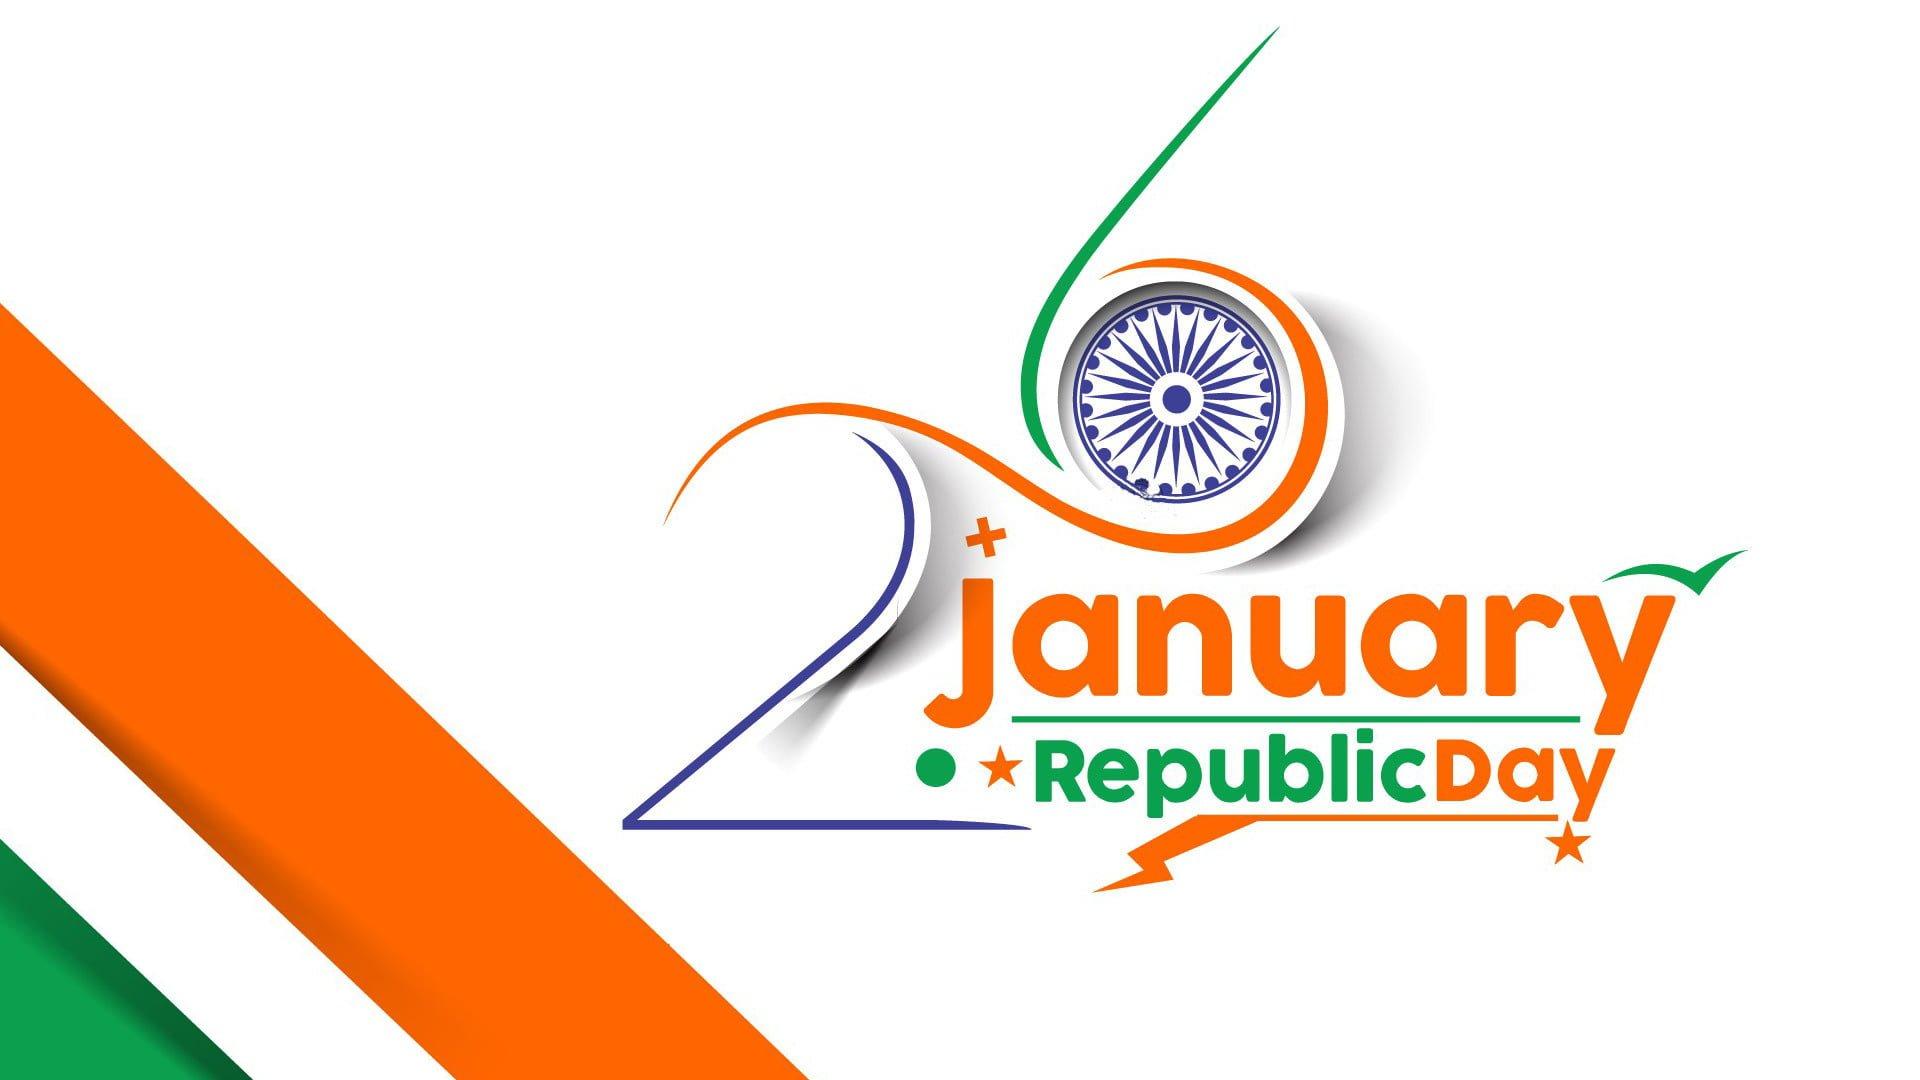 January Republic Day 2019 Background & Png Download. {2019}